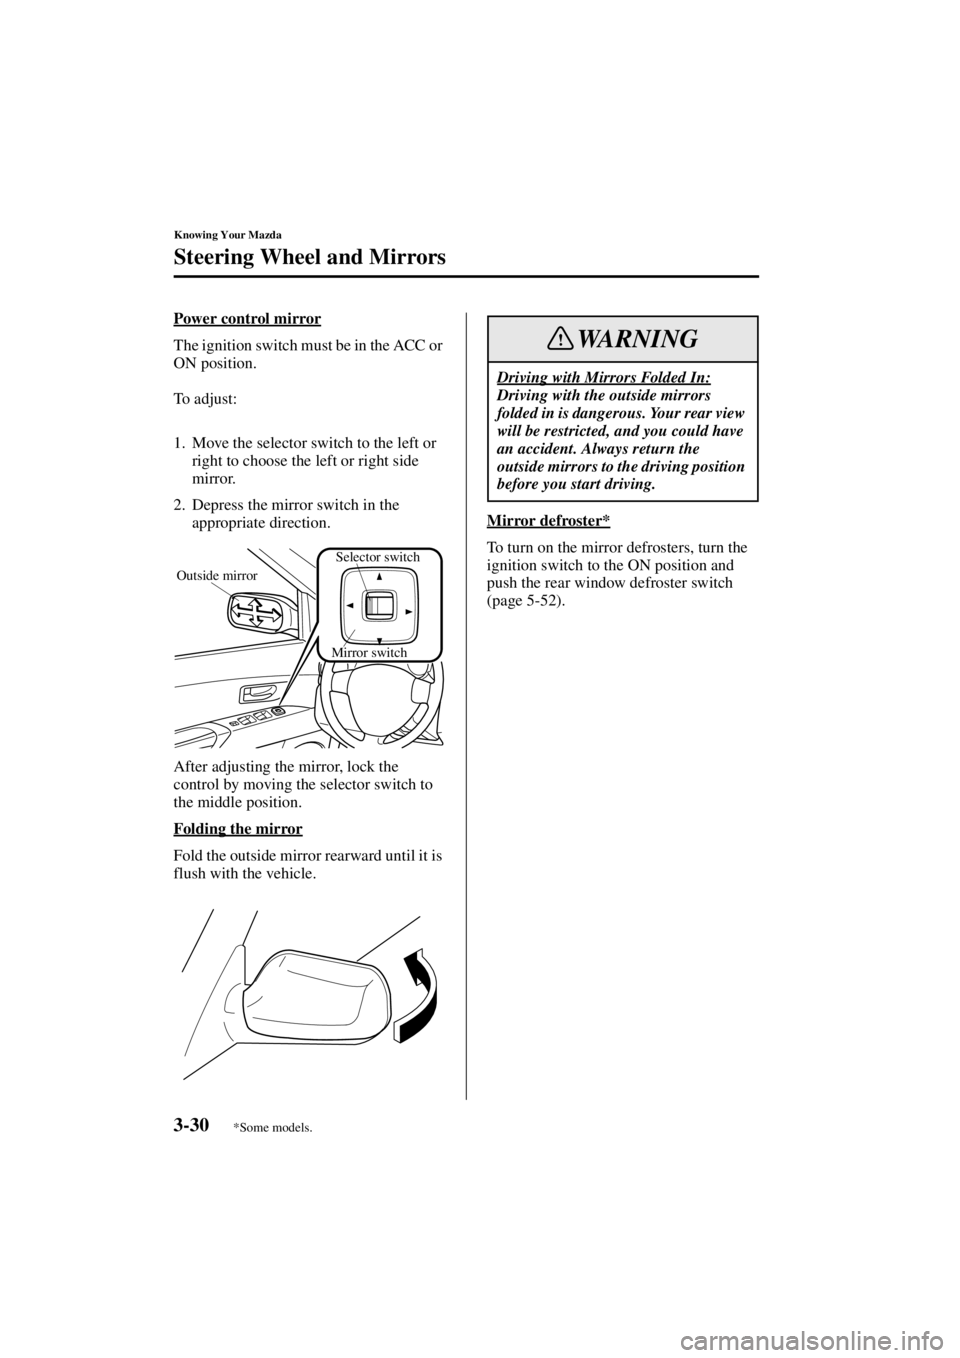 MAZDA MODEL 3 5-DOOR 2004  Owners Manual 3-30
Knowing Your Mazda
Steering Wheel and Mirrors
Form No. 8S18-EA-03I
Power control mirror
The ignition switch must be in the ACC or 
ON position.
To  a d j u s t :
1. Move the selector switch to th